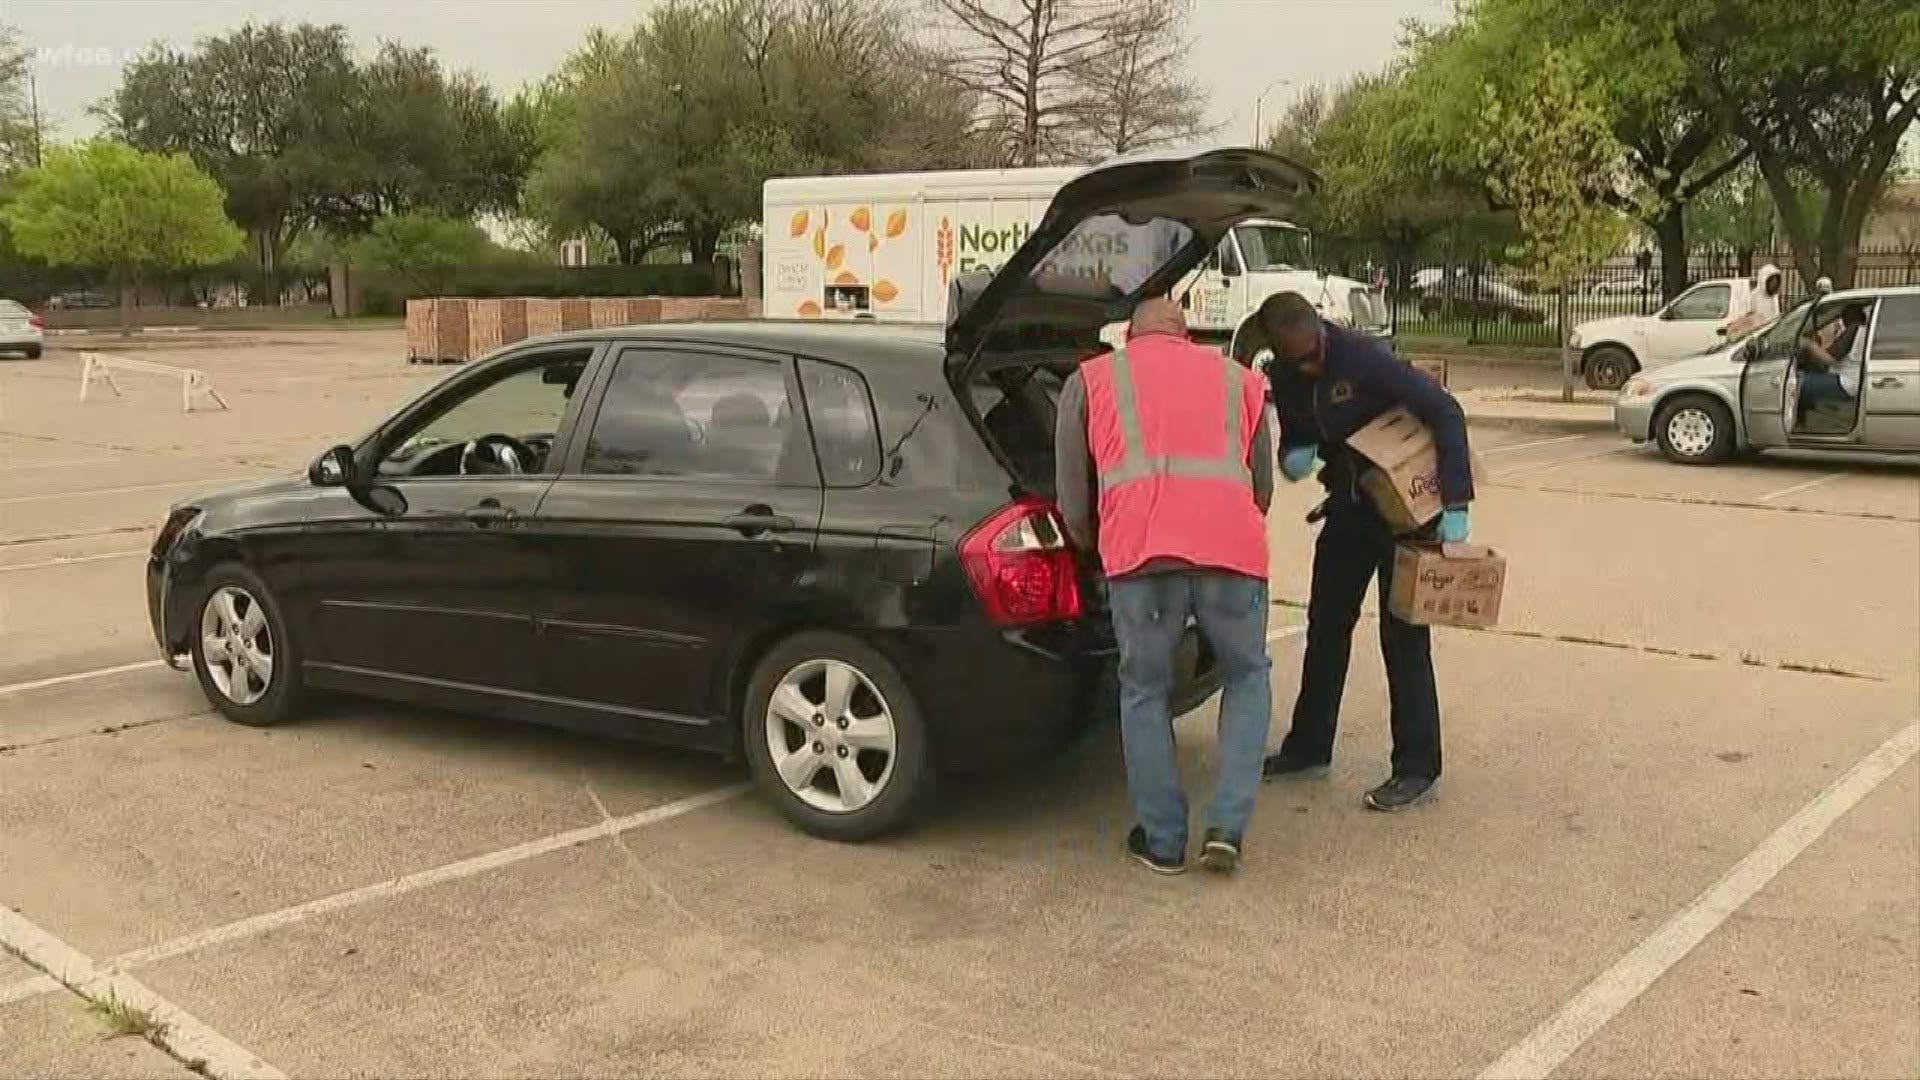 Local organizations throughout North Texas are offering food distributions this weekend.